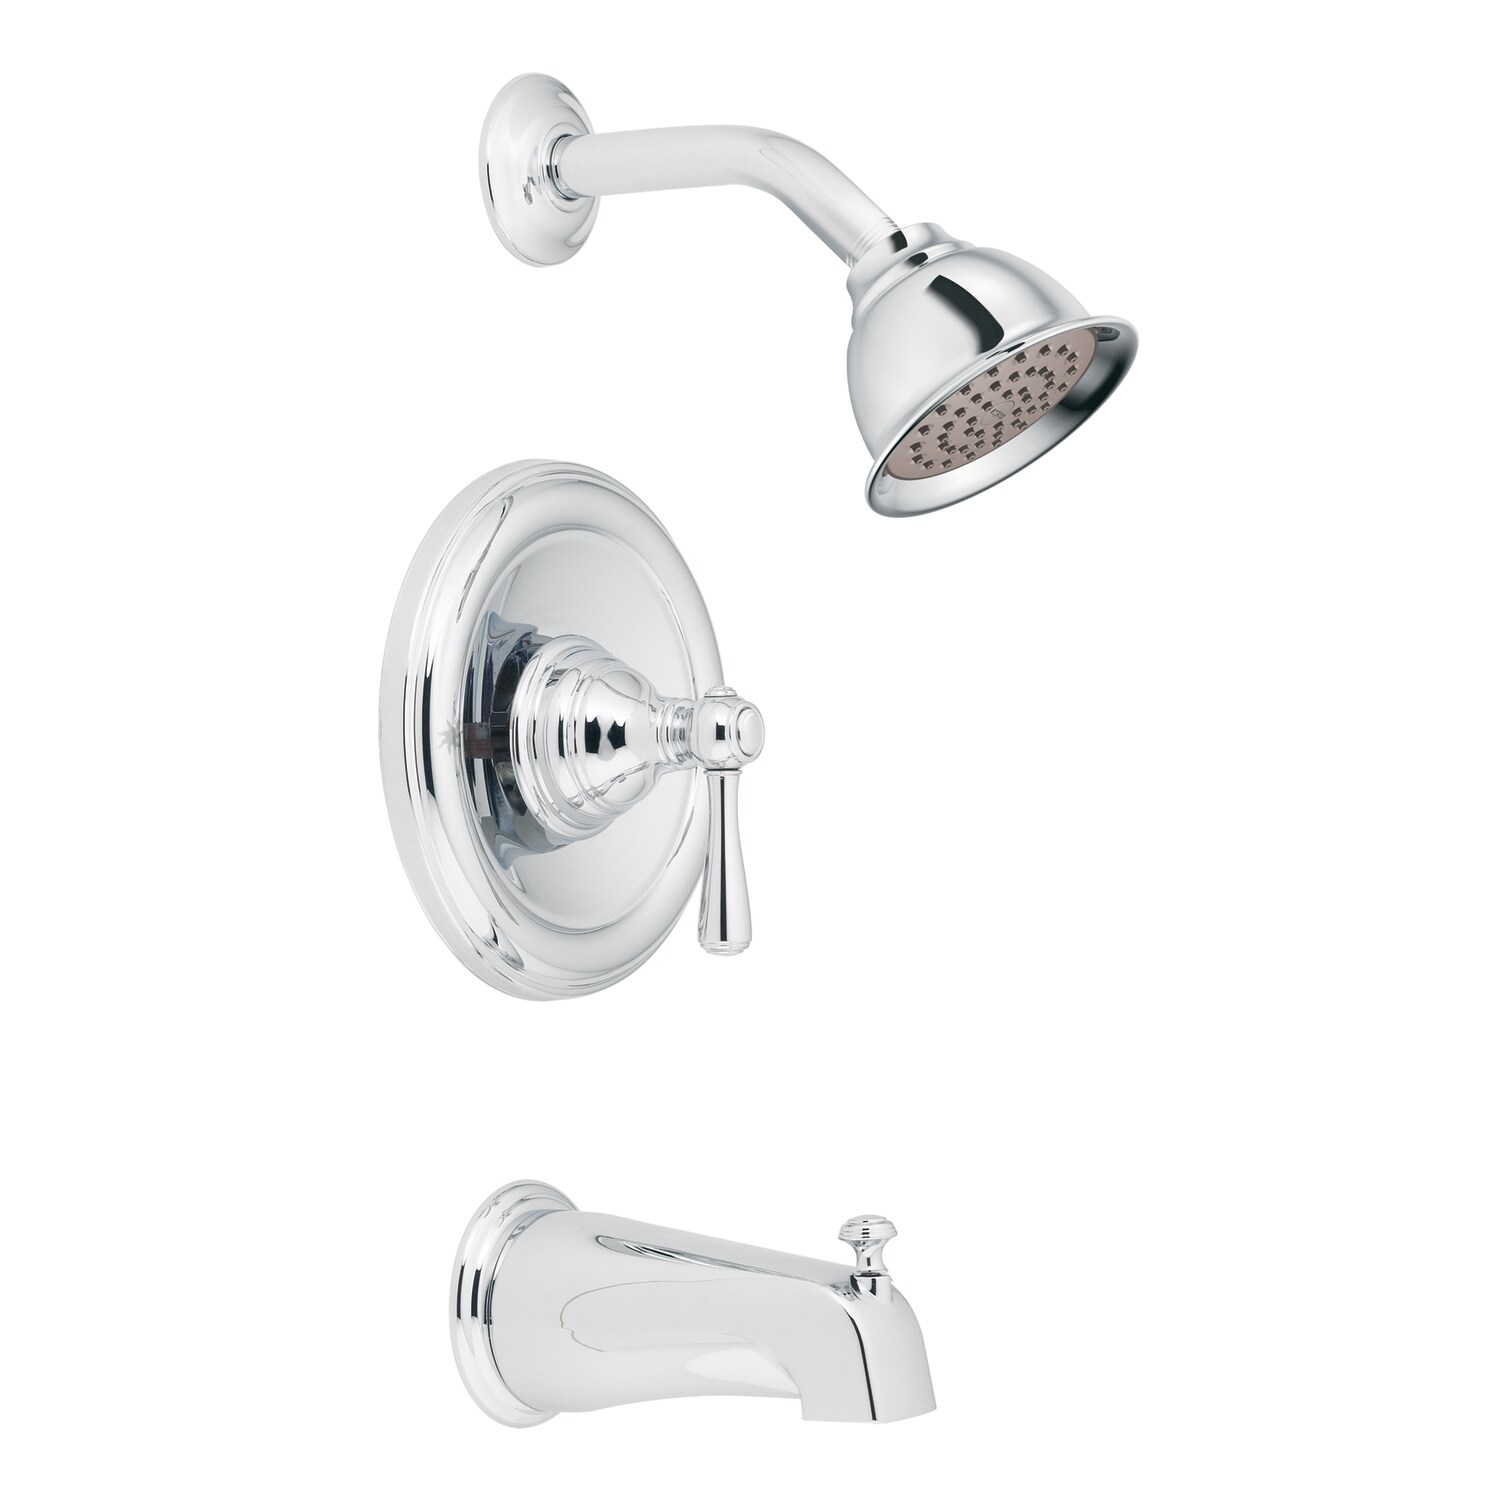 MOEN Adler 2-Handle 1-Spray Tub and Shower Faucet with Valve in Chrome W/Valve 